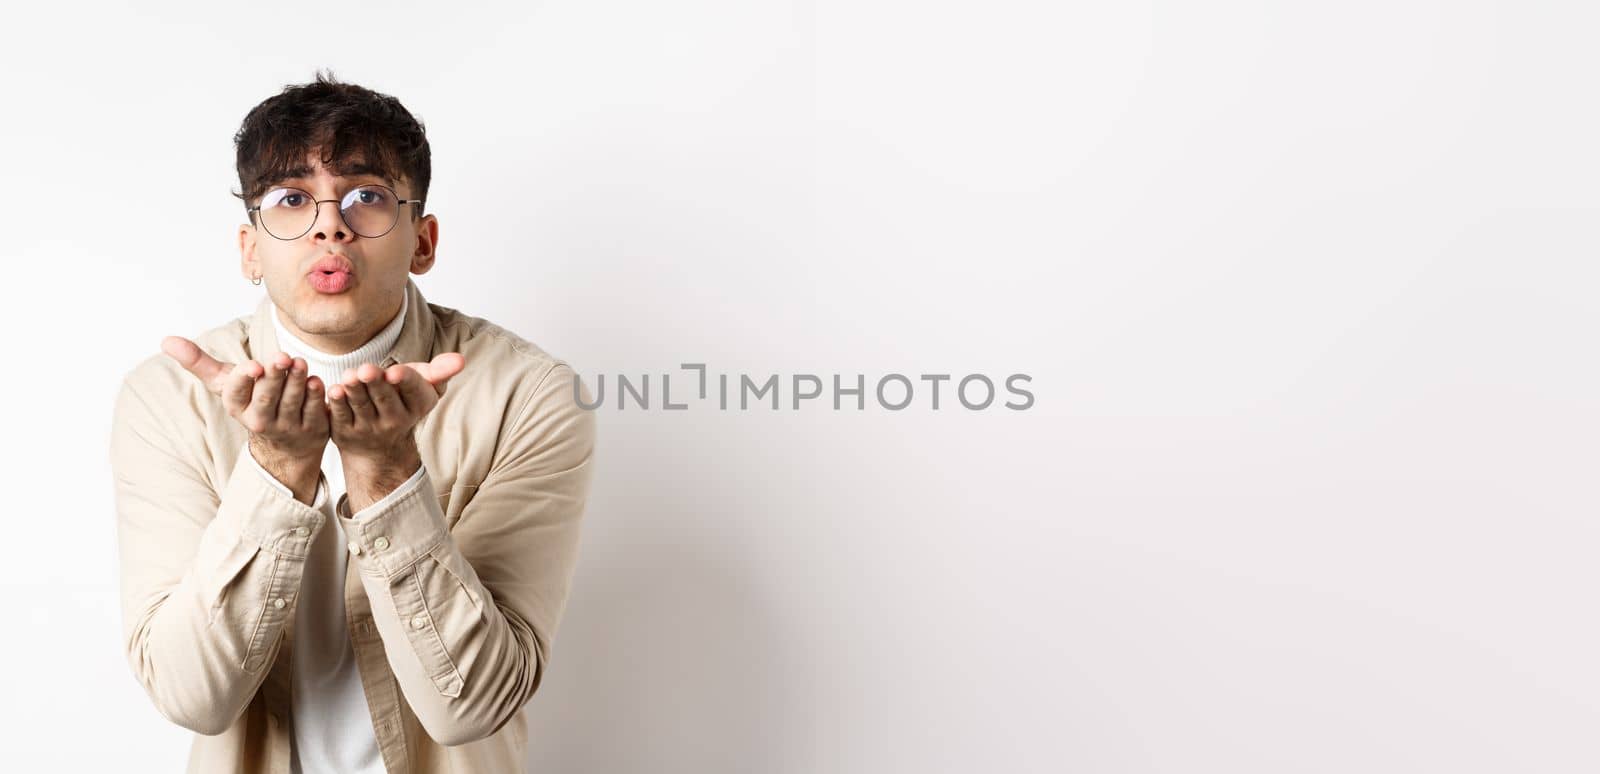 Cute boyfriend sending air kiss at camera on happy Valentines day, looking tender at lover, standing in casual clothes and glasses on white background.